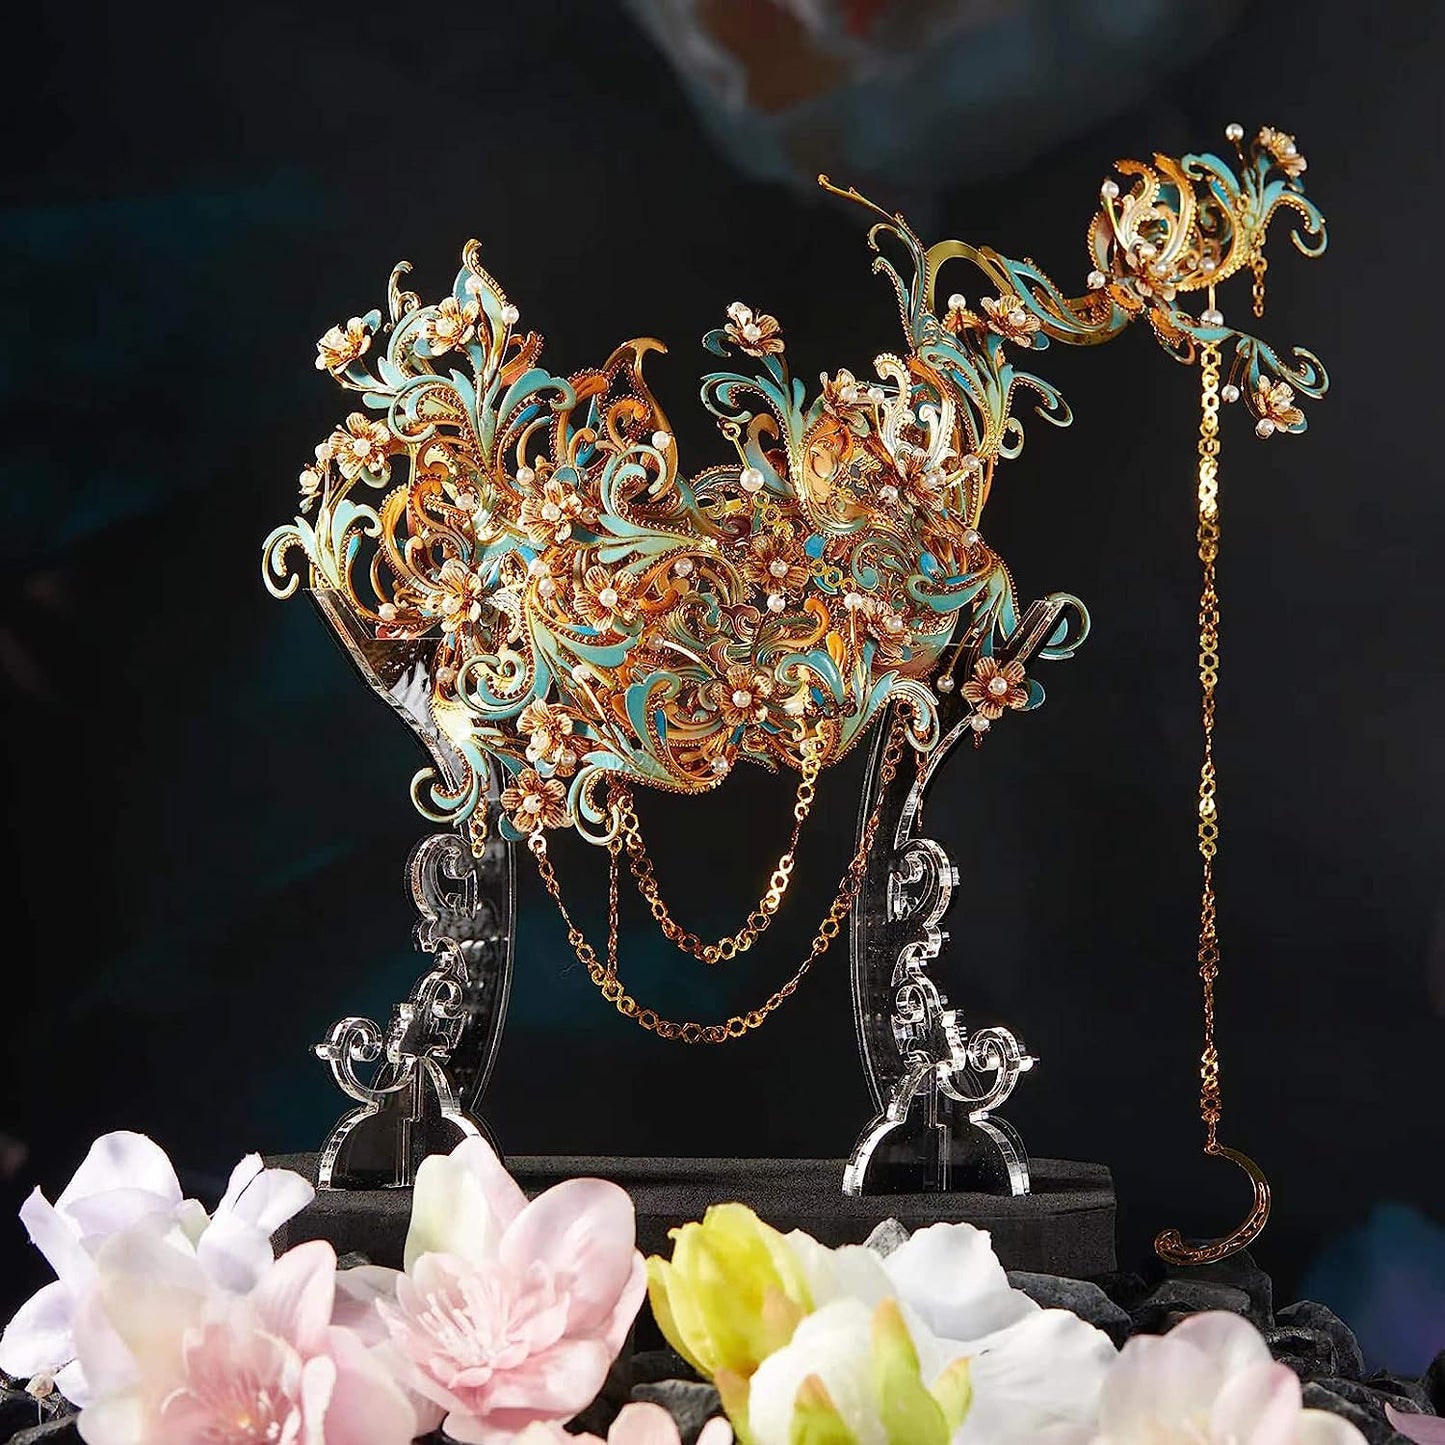 Piececool 3D Puzzles for Adults, Rhyme Blossoming - Masquerade Mask 3D Metal Model